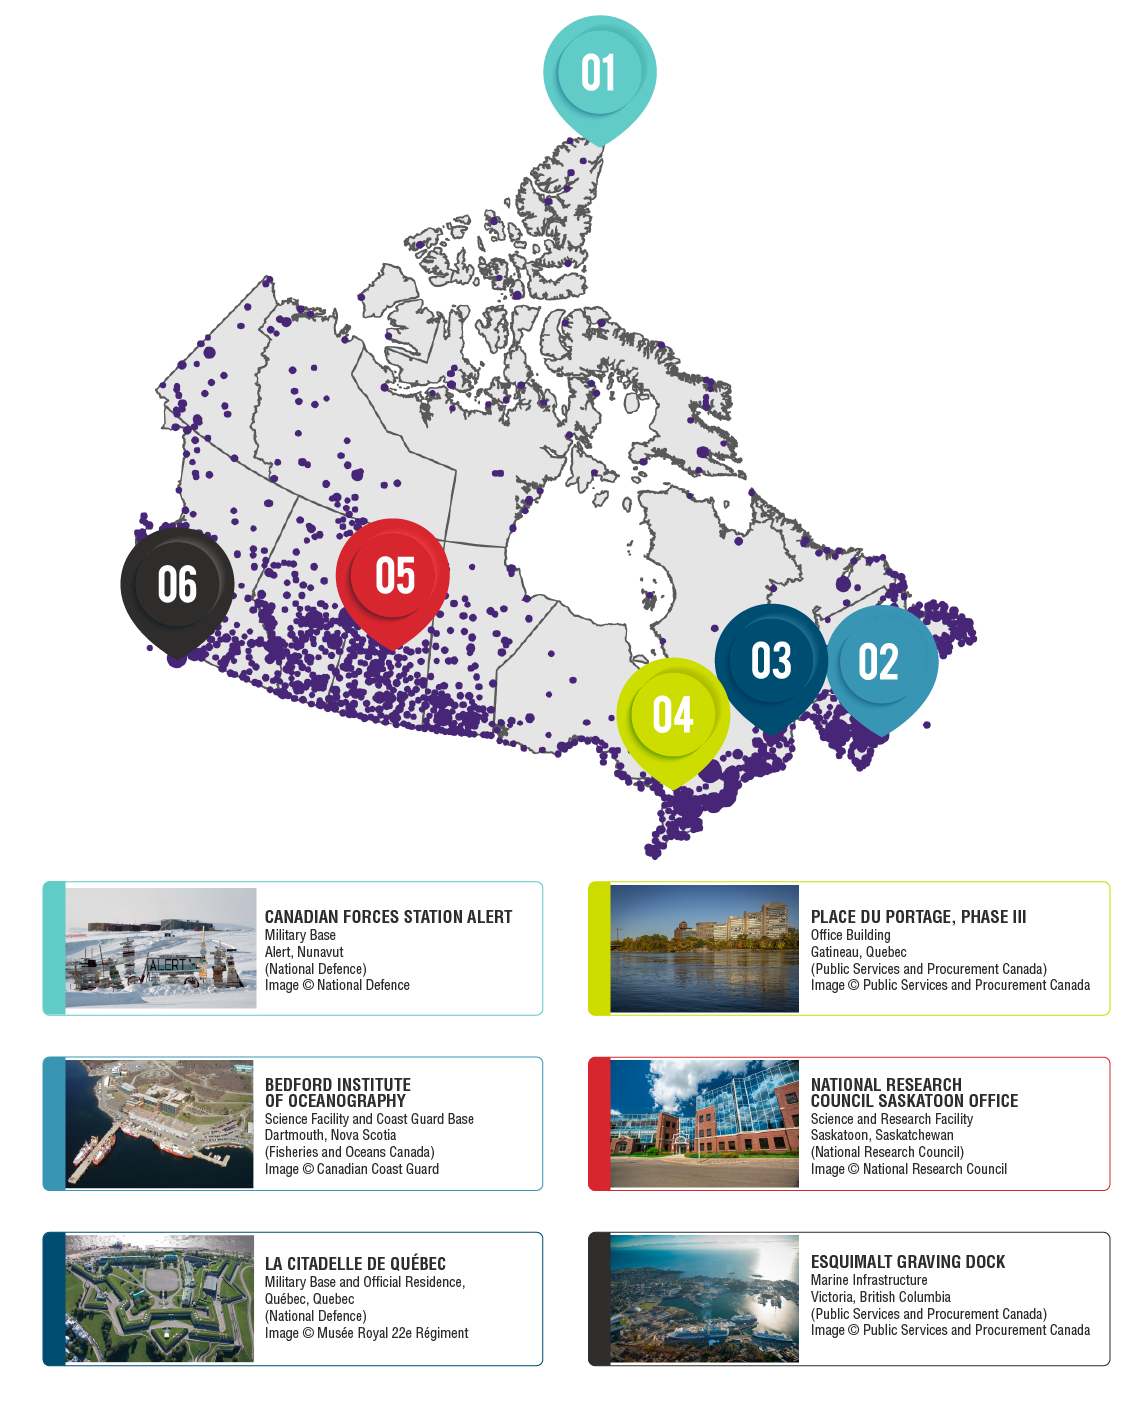 Map 1: examples of Government of Canada real property assets across the country